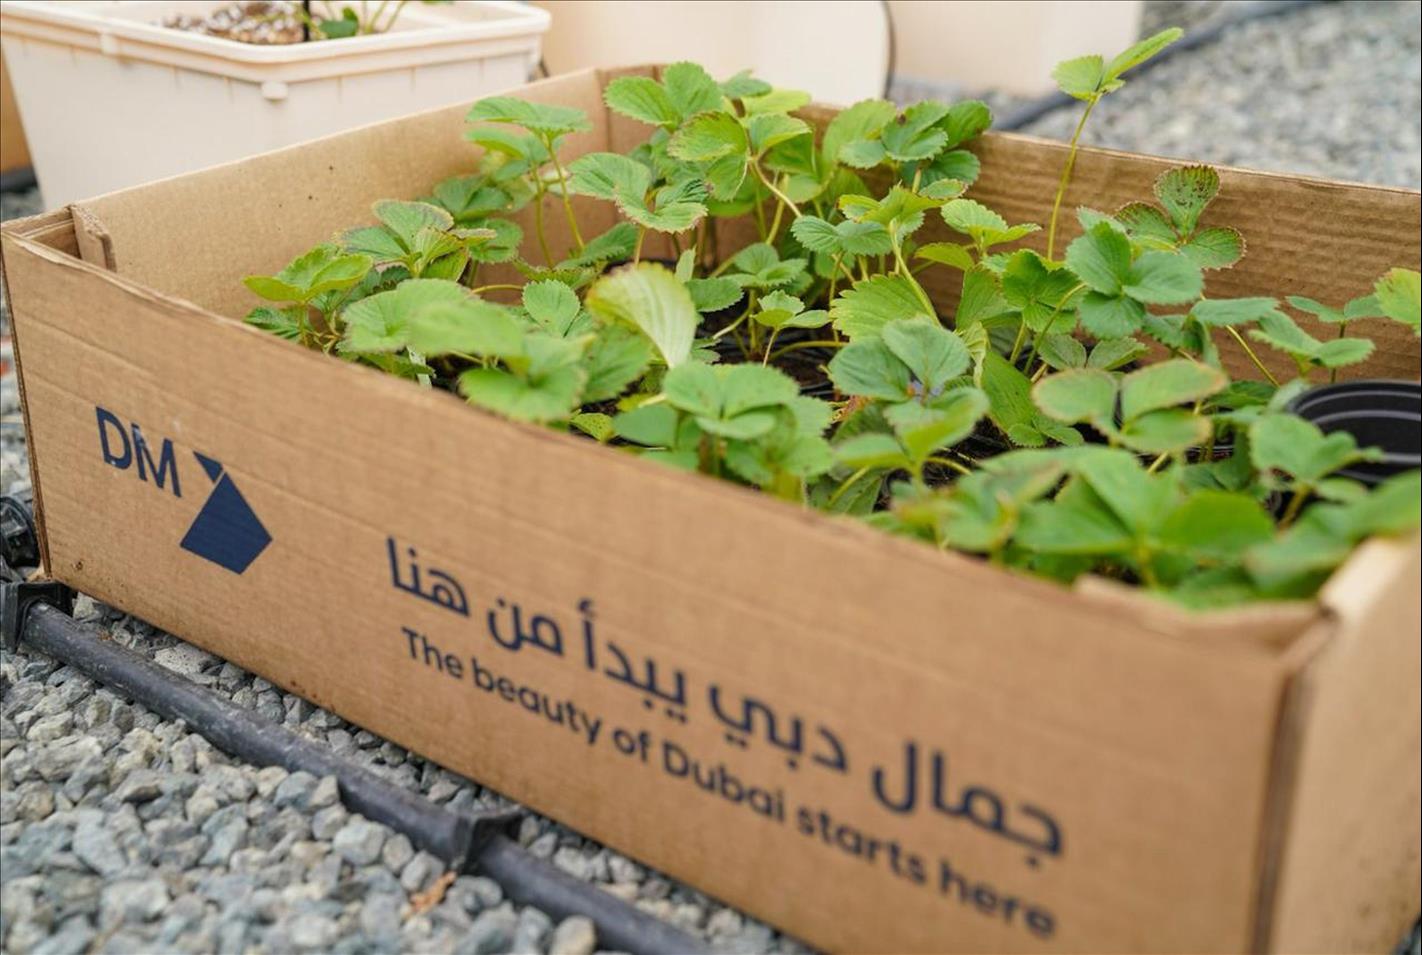 MUST-DO ACTIVITIES AT THE HATTA FARMING FESTIVAL ANNOUNCED